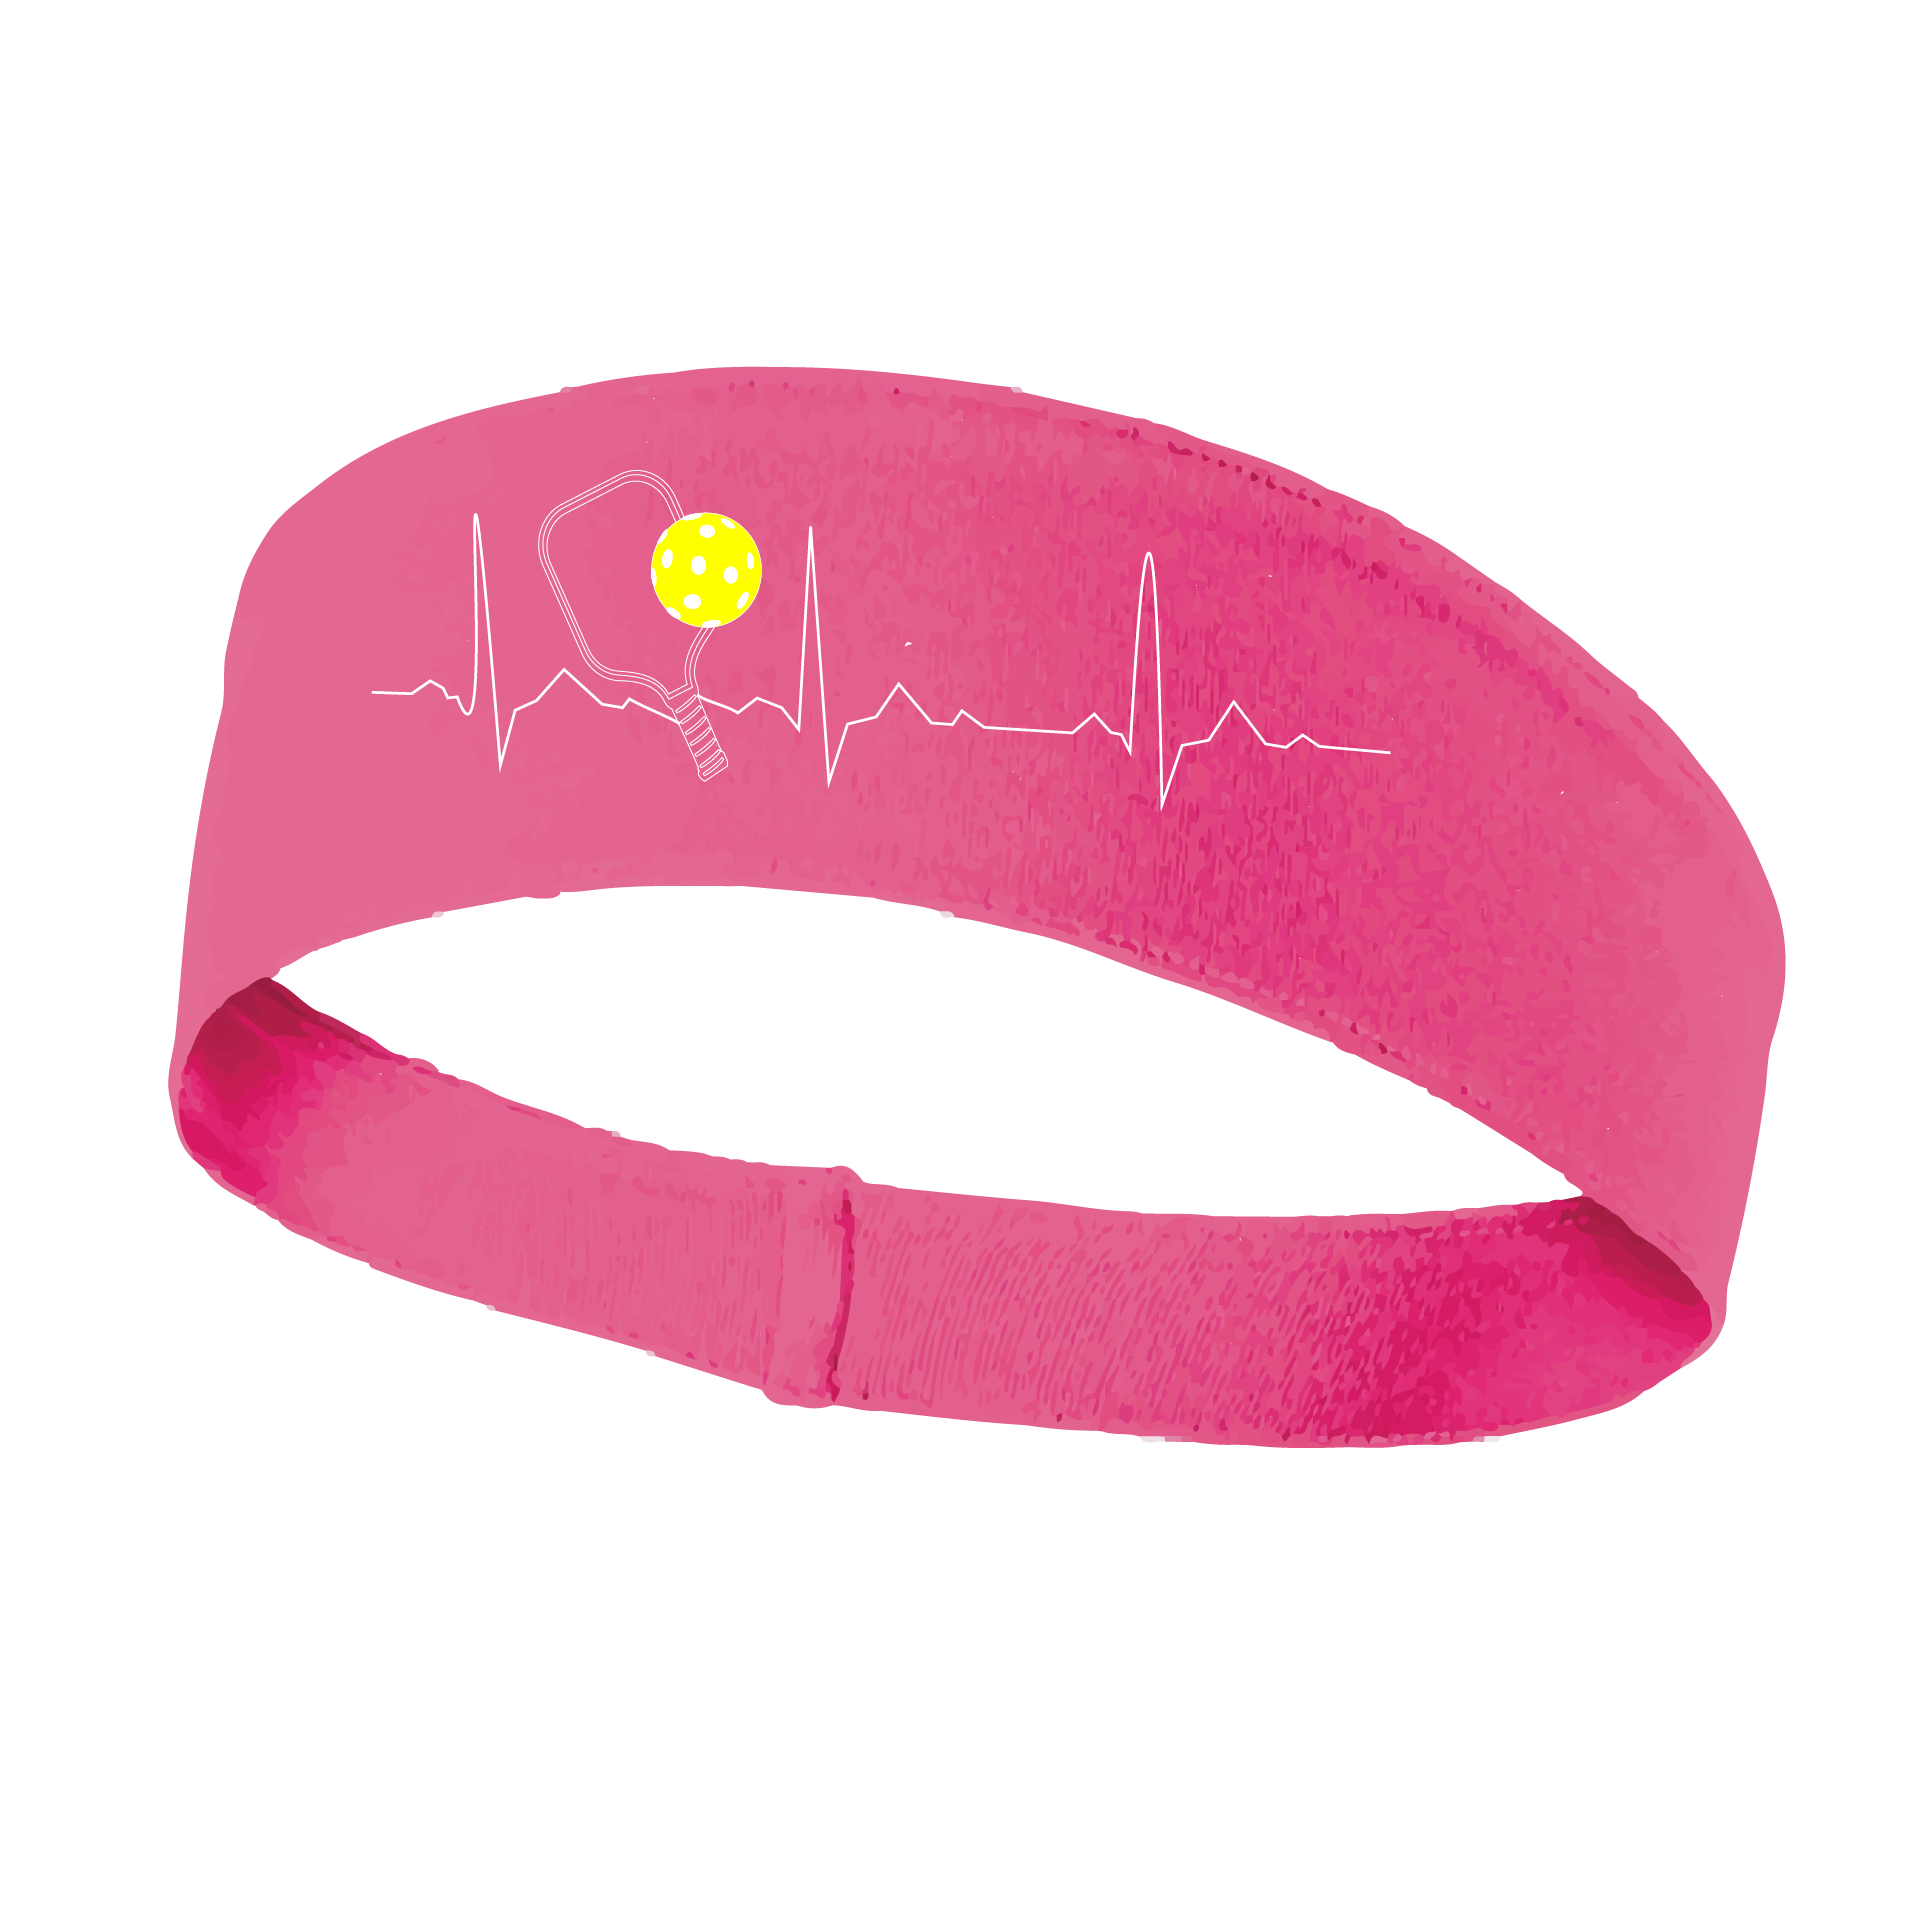 Pickleball Headband Design: Pickleball Heartbeat with white lettering and yellow ball  This fun, pickleball designed, moisture-wicking headband narrows in the back to fit more securely. Single-needle top-stitched edging. These headbands come in a variety of colors. Truly shows your love for the sport of pickleball!!